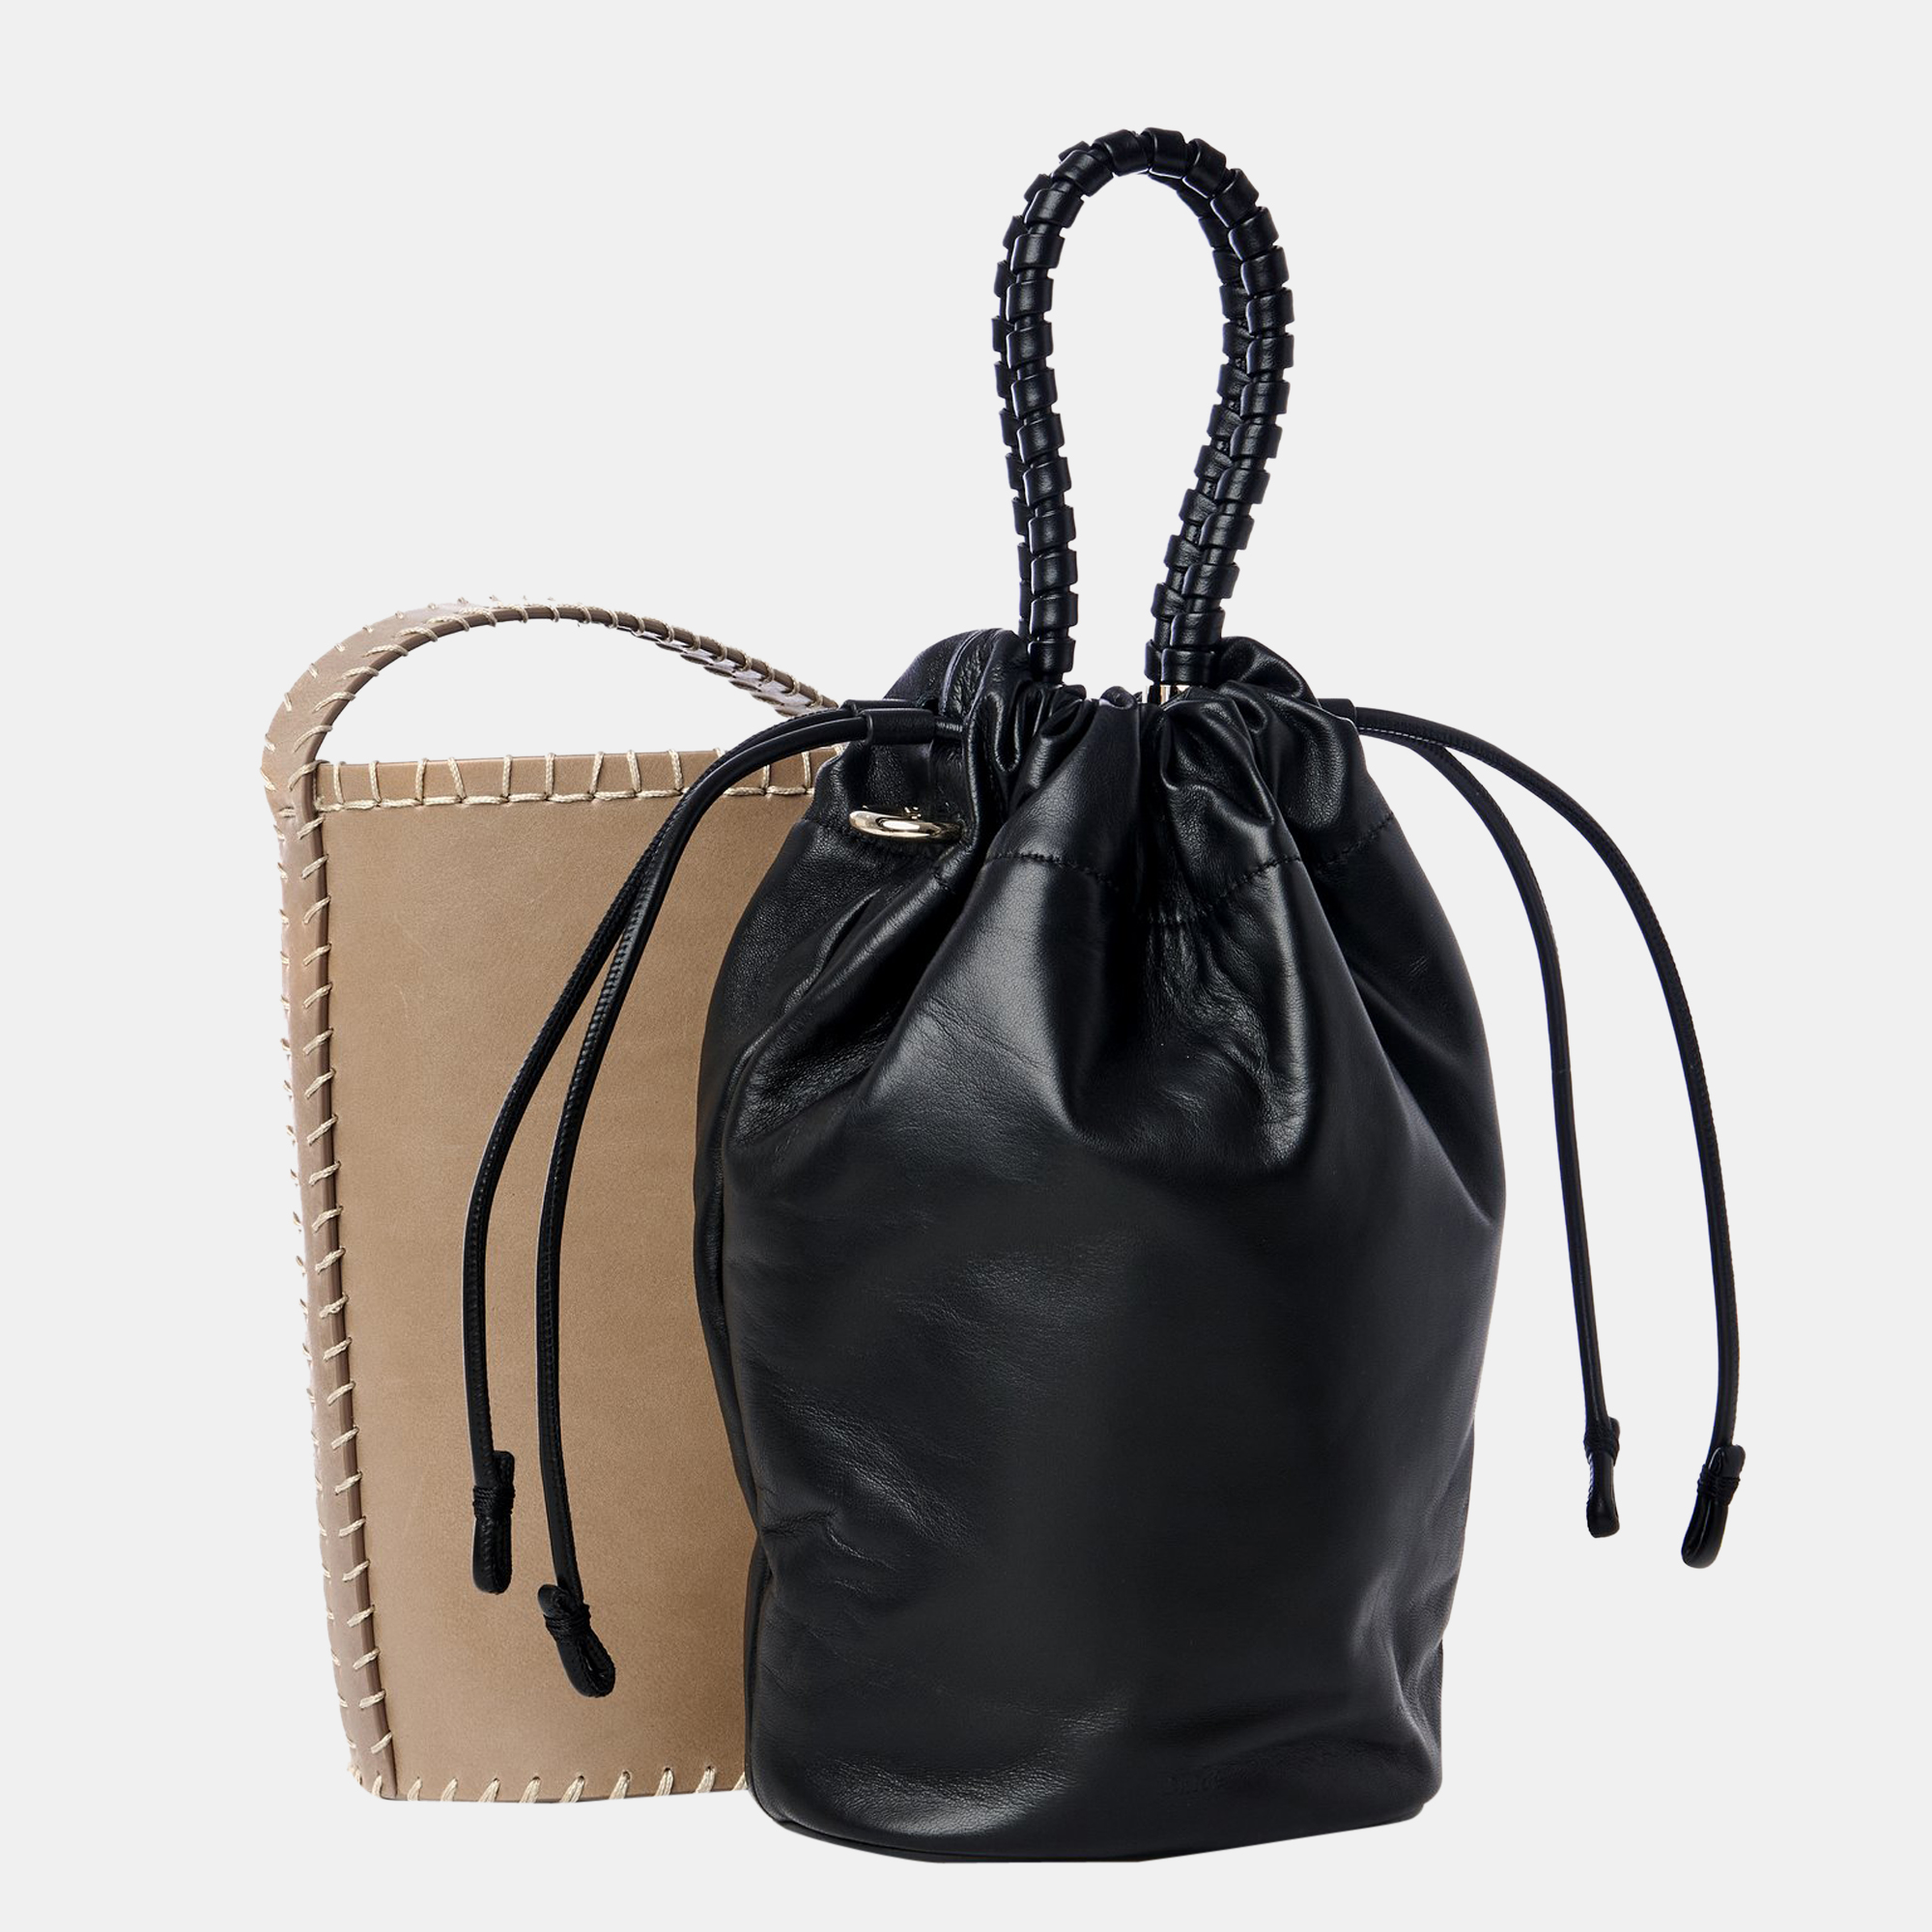 Trust this Chloe bucket bag to be light durable and comfortable to carry. It is crafted beautifully using the best materials to be a durable style ally.